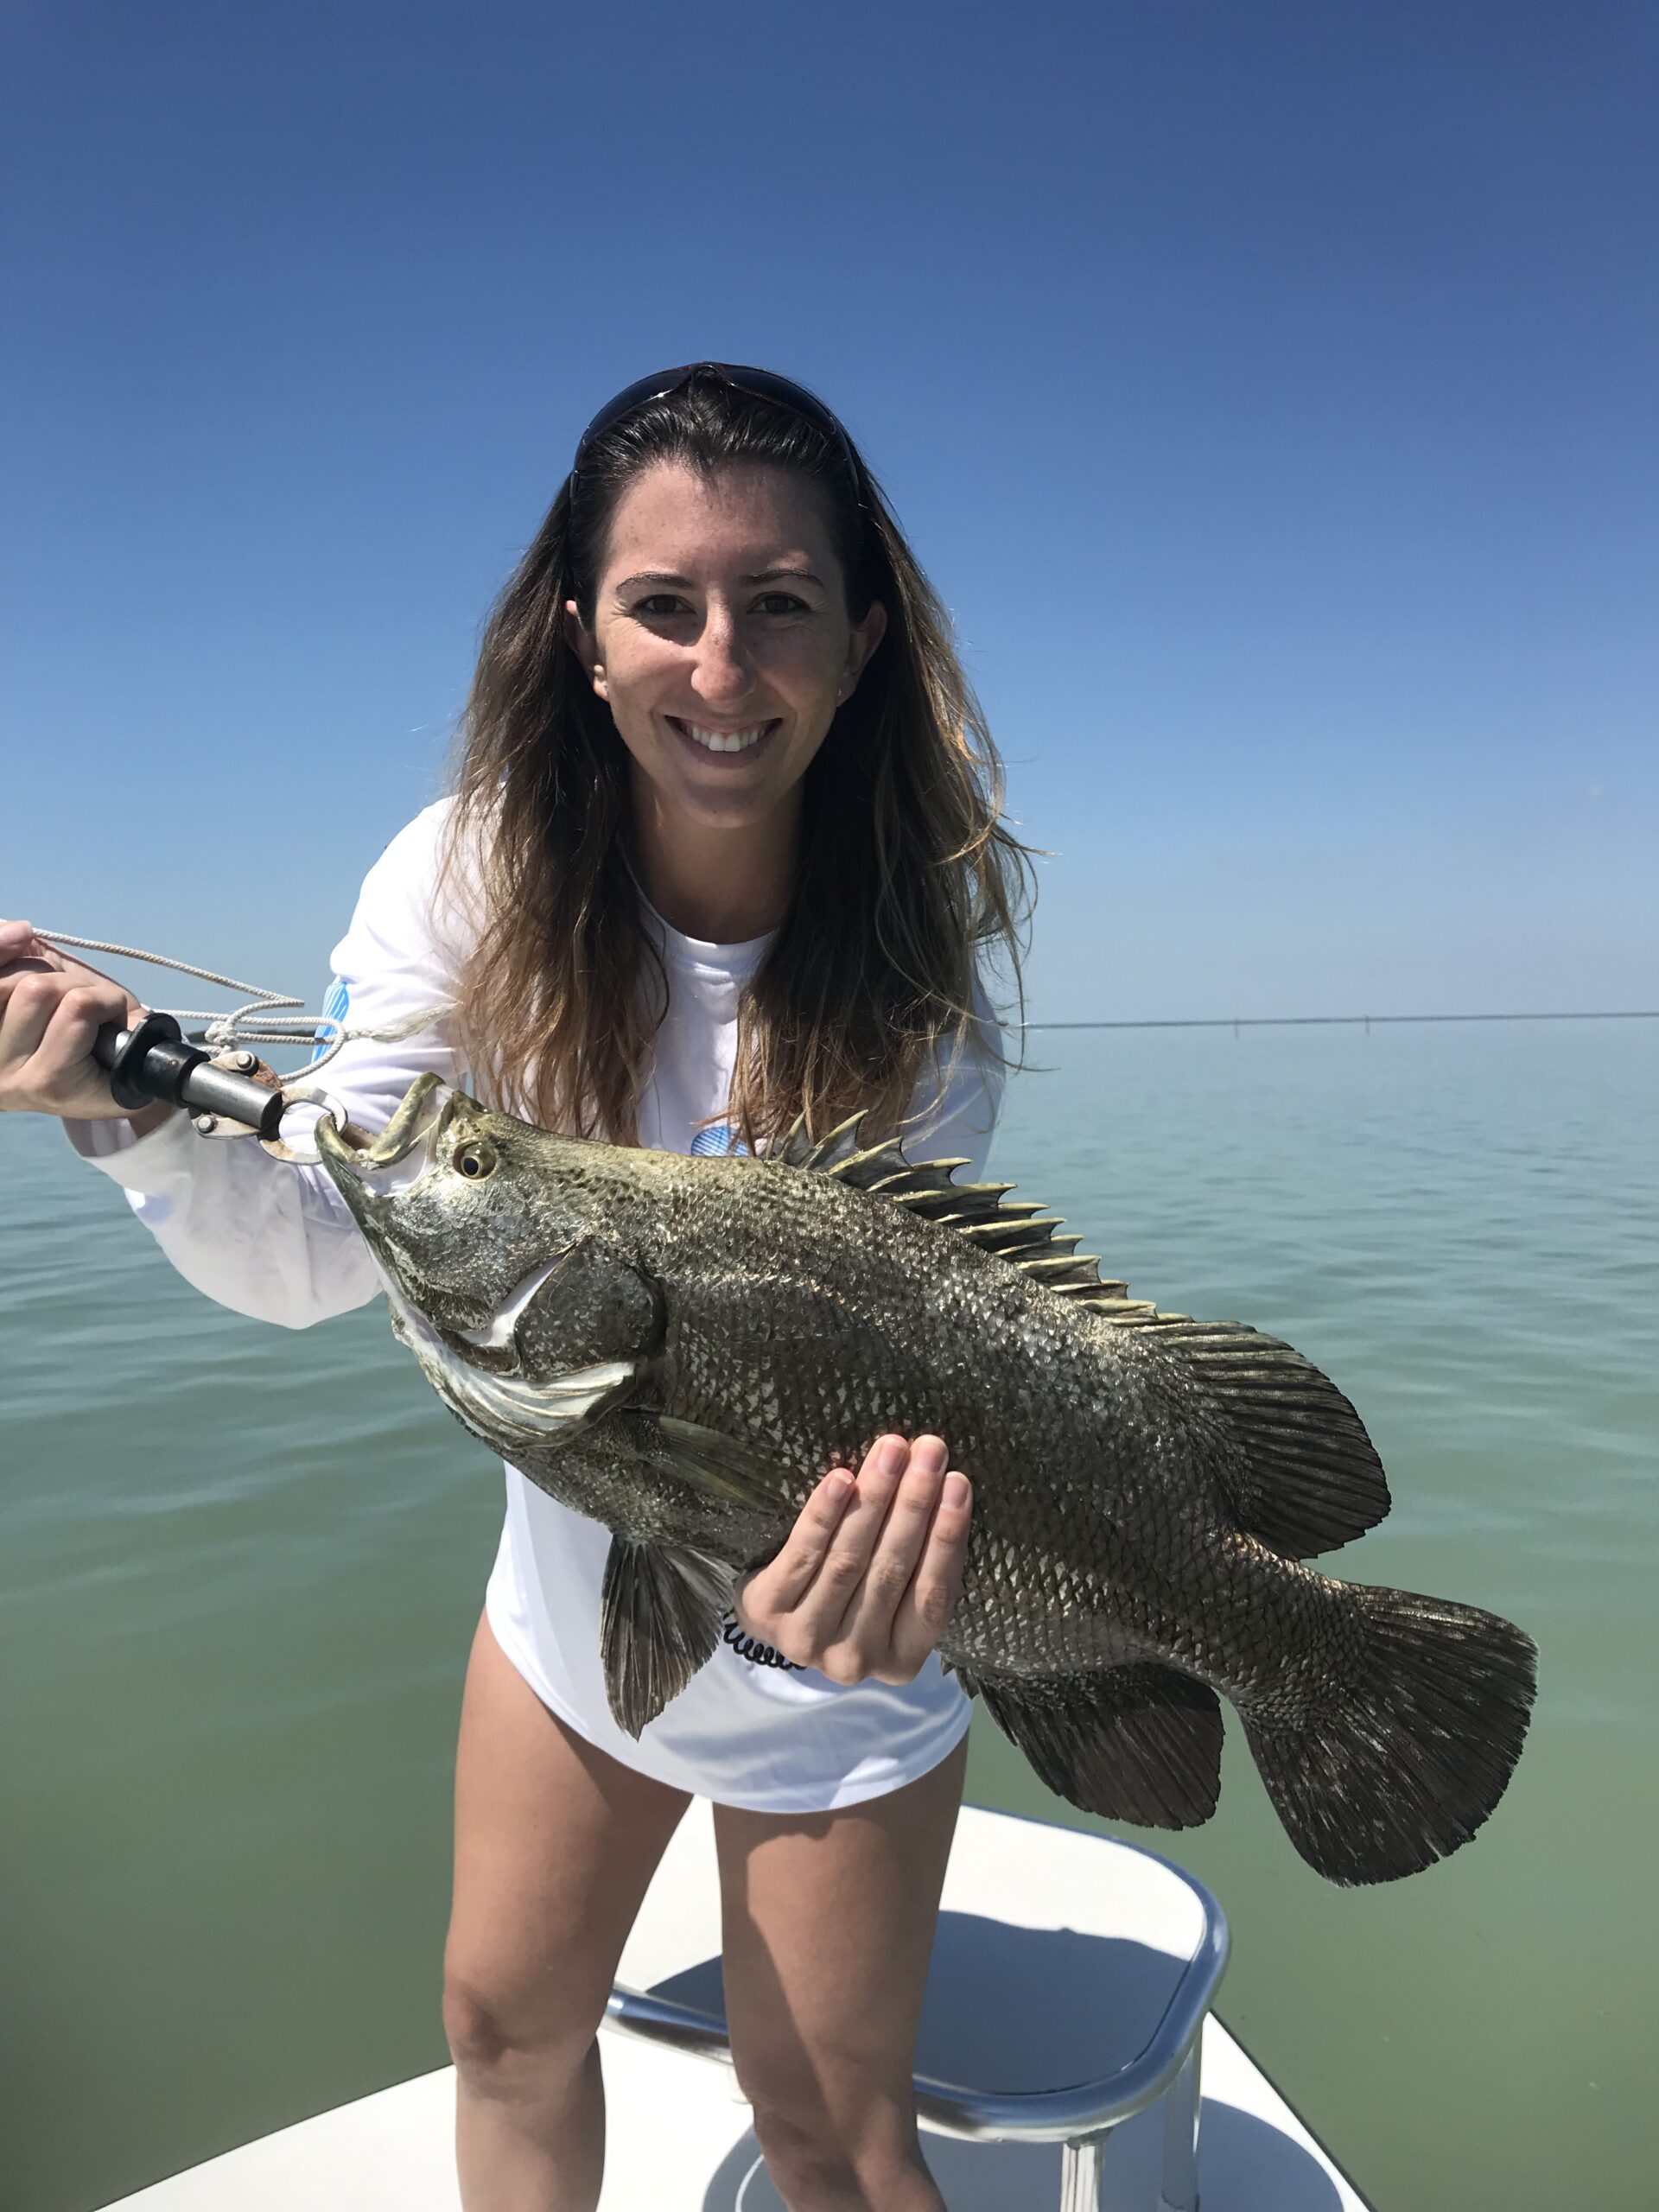 Smiling woman holding a Triple tail fish. Opens a photo gallery.